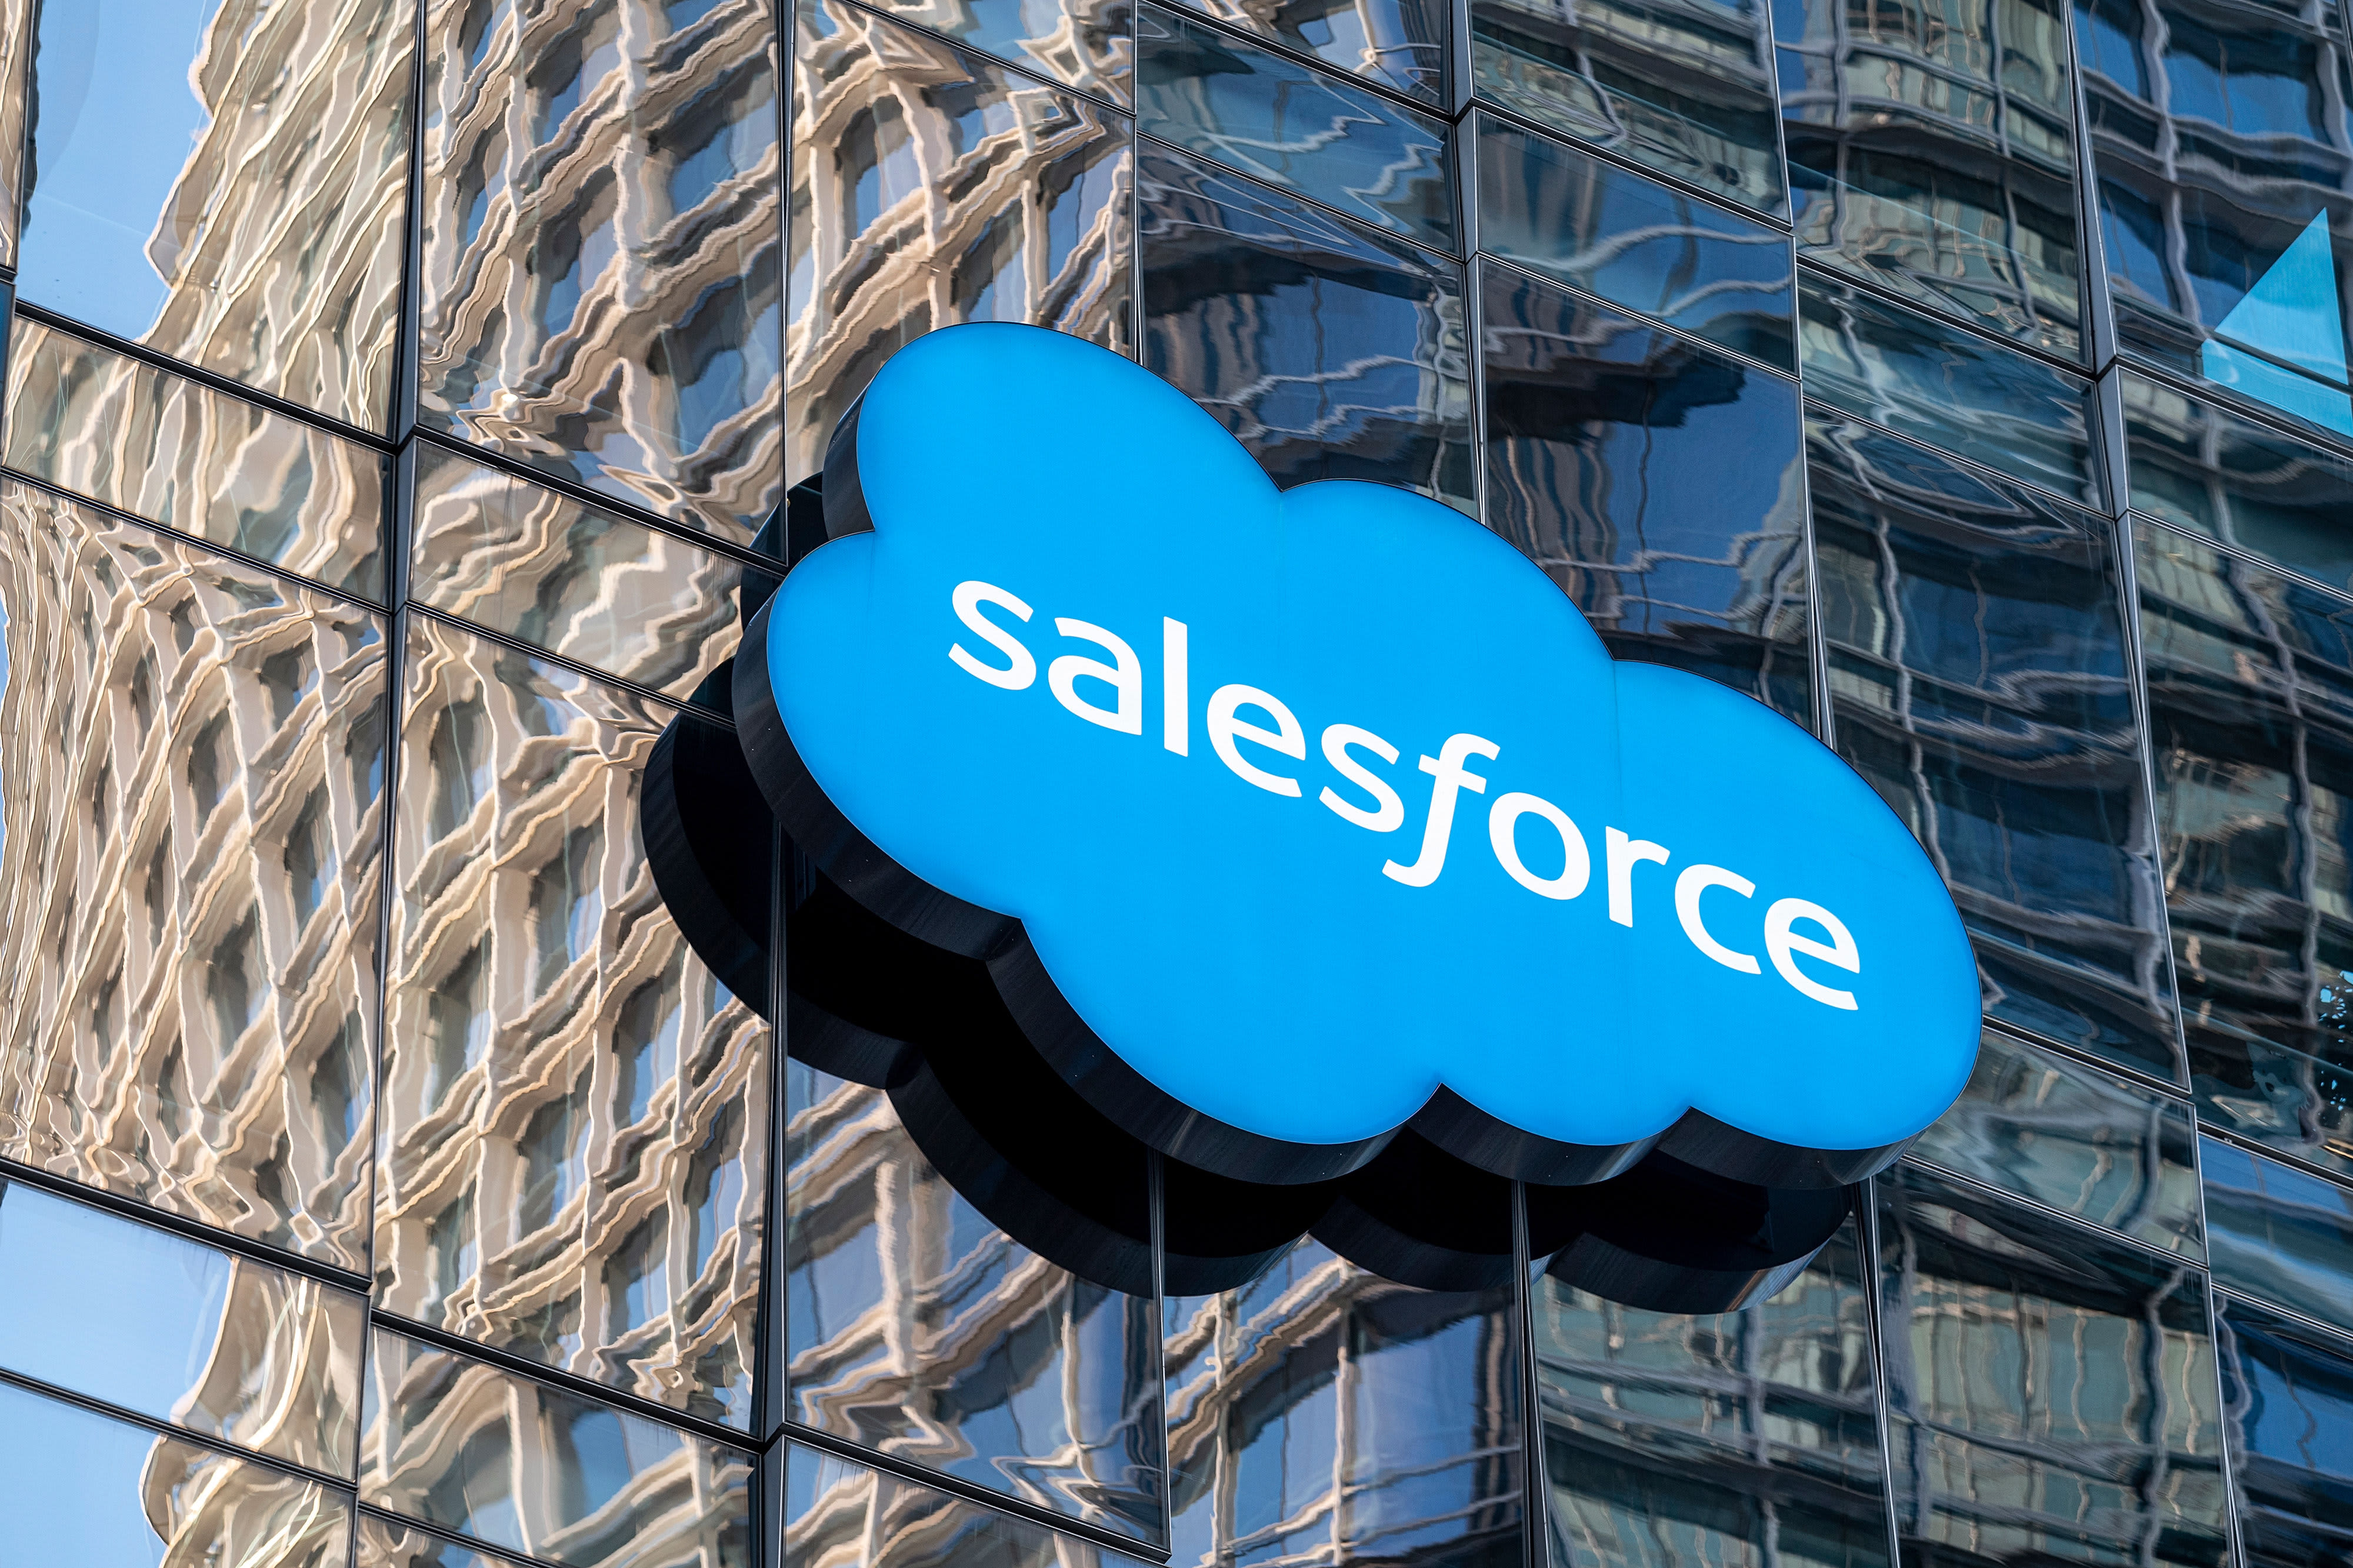 salesforce is cutting 10% of its personnel, more than 7,000 employees